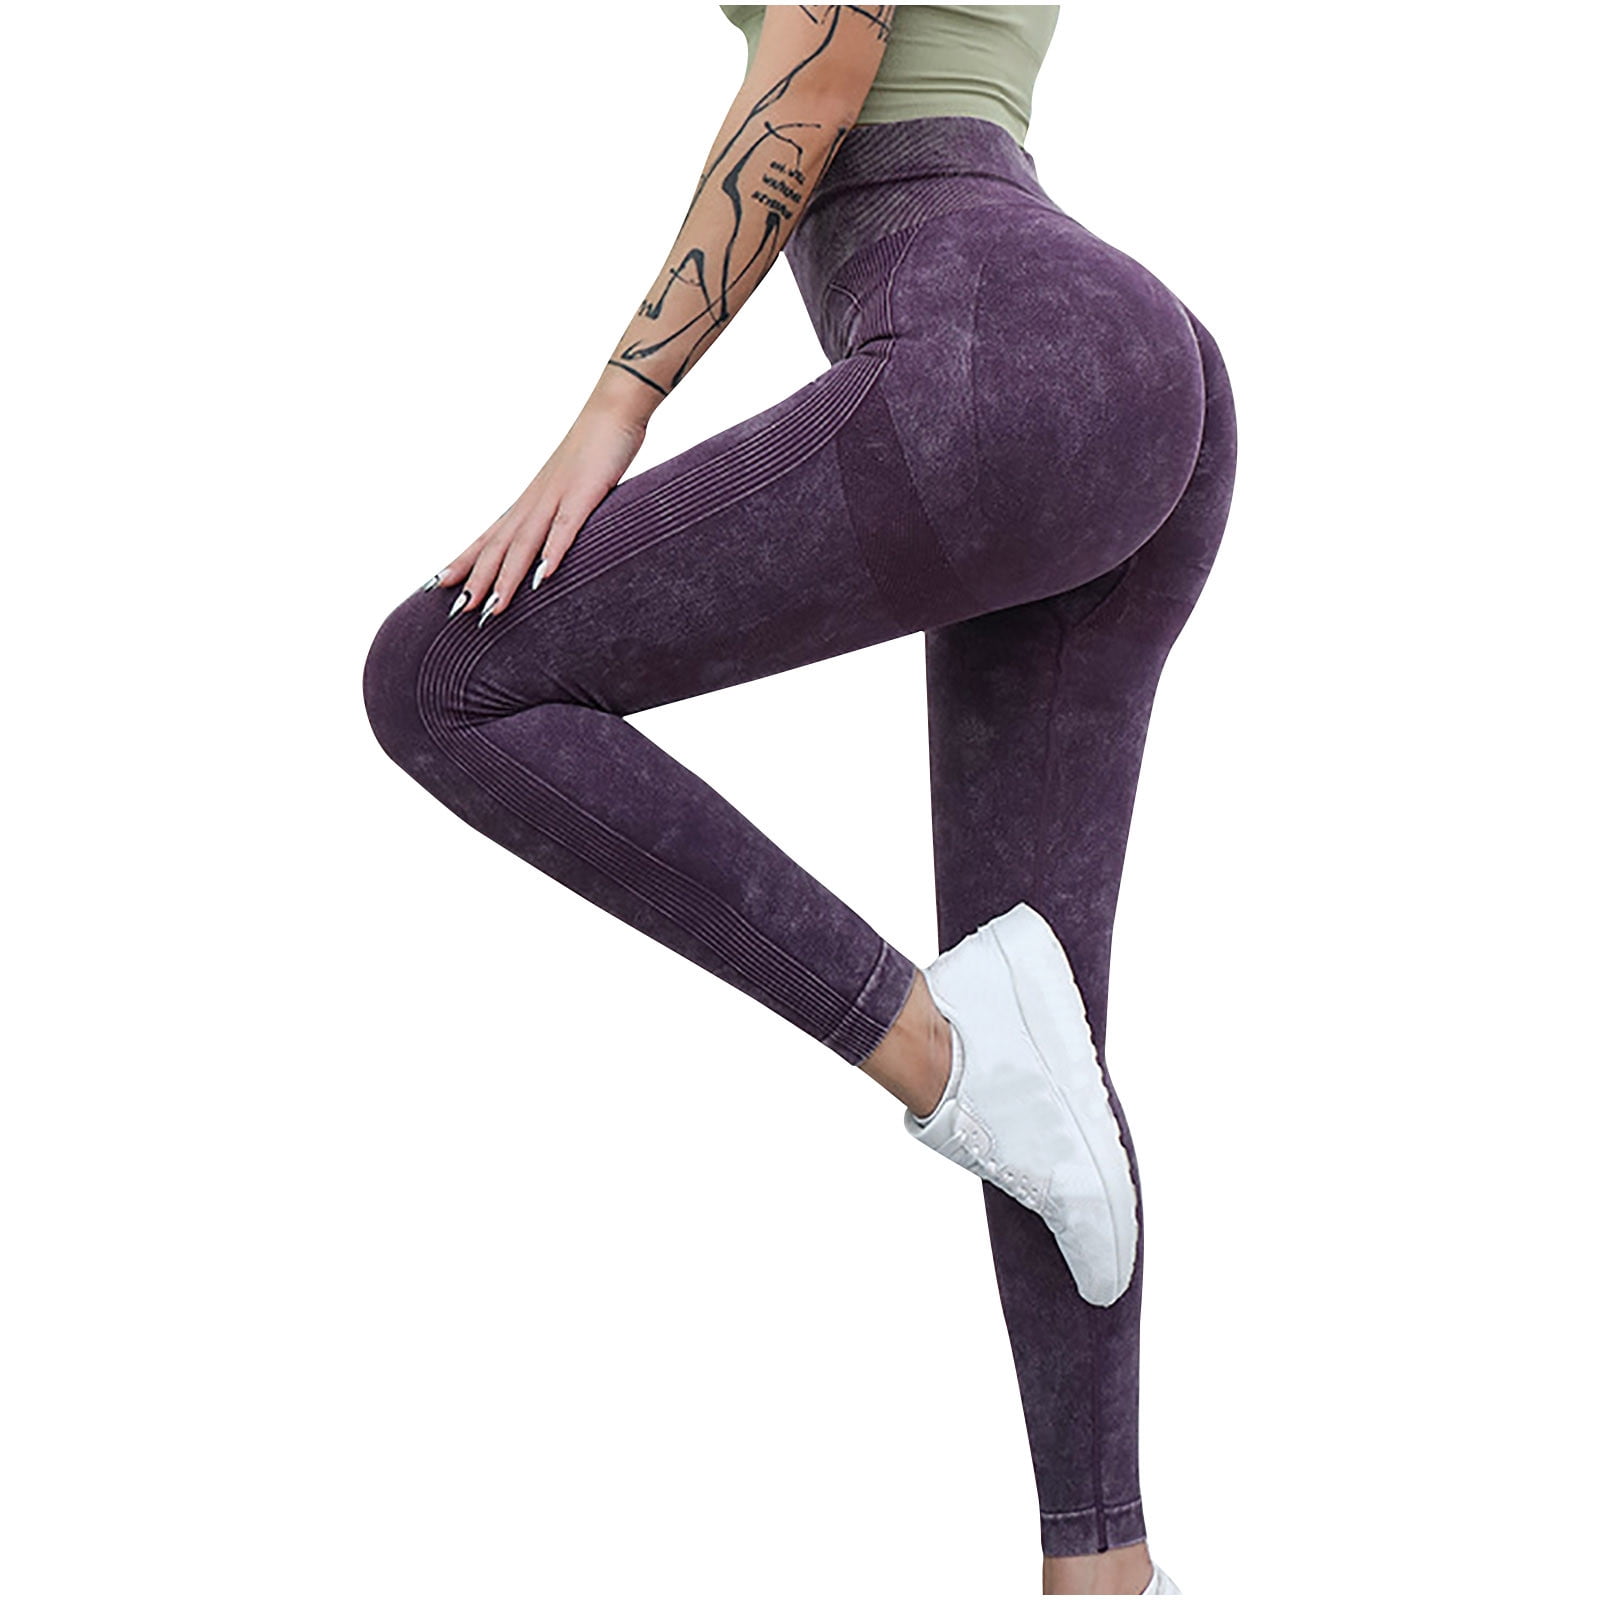 Reduce Price Hfyihgf Workout Leggings for Women Scrunch Butt Lifting High  Waisted Seamless Yoga Leggings Sexy Soft Compression Tights(Hot Pink,S) 